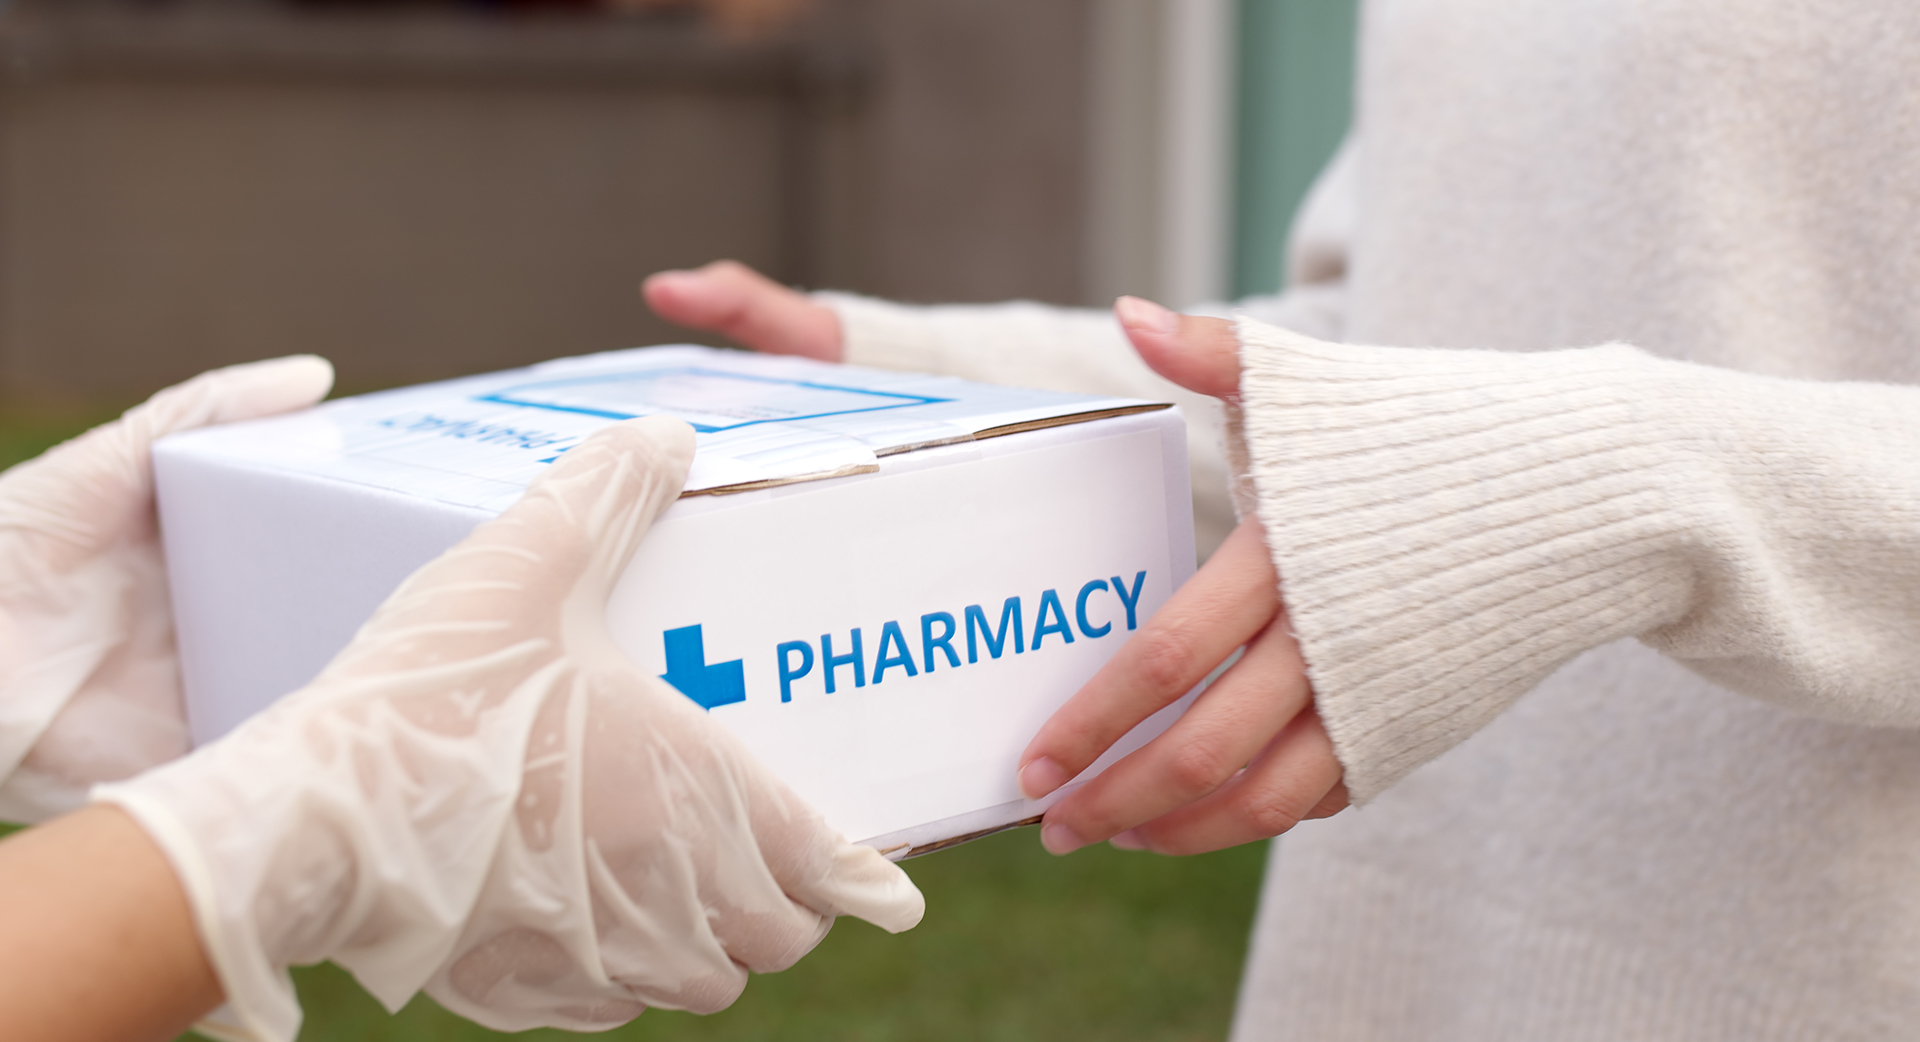 Medication Home Delivery in Scotch Plains